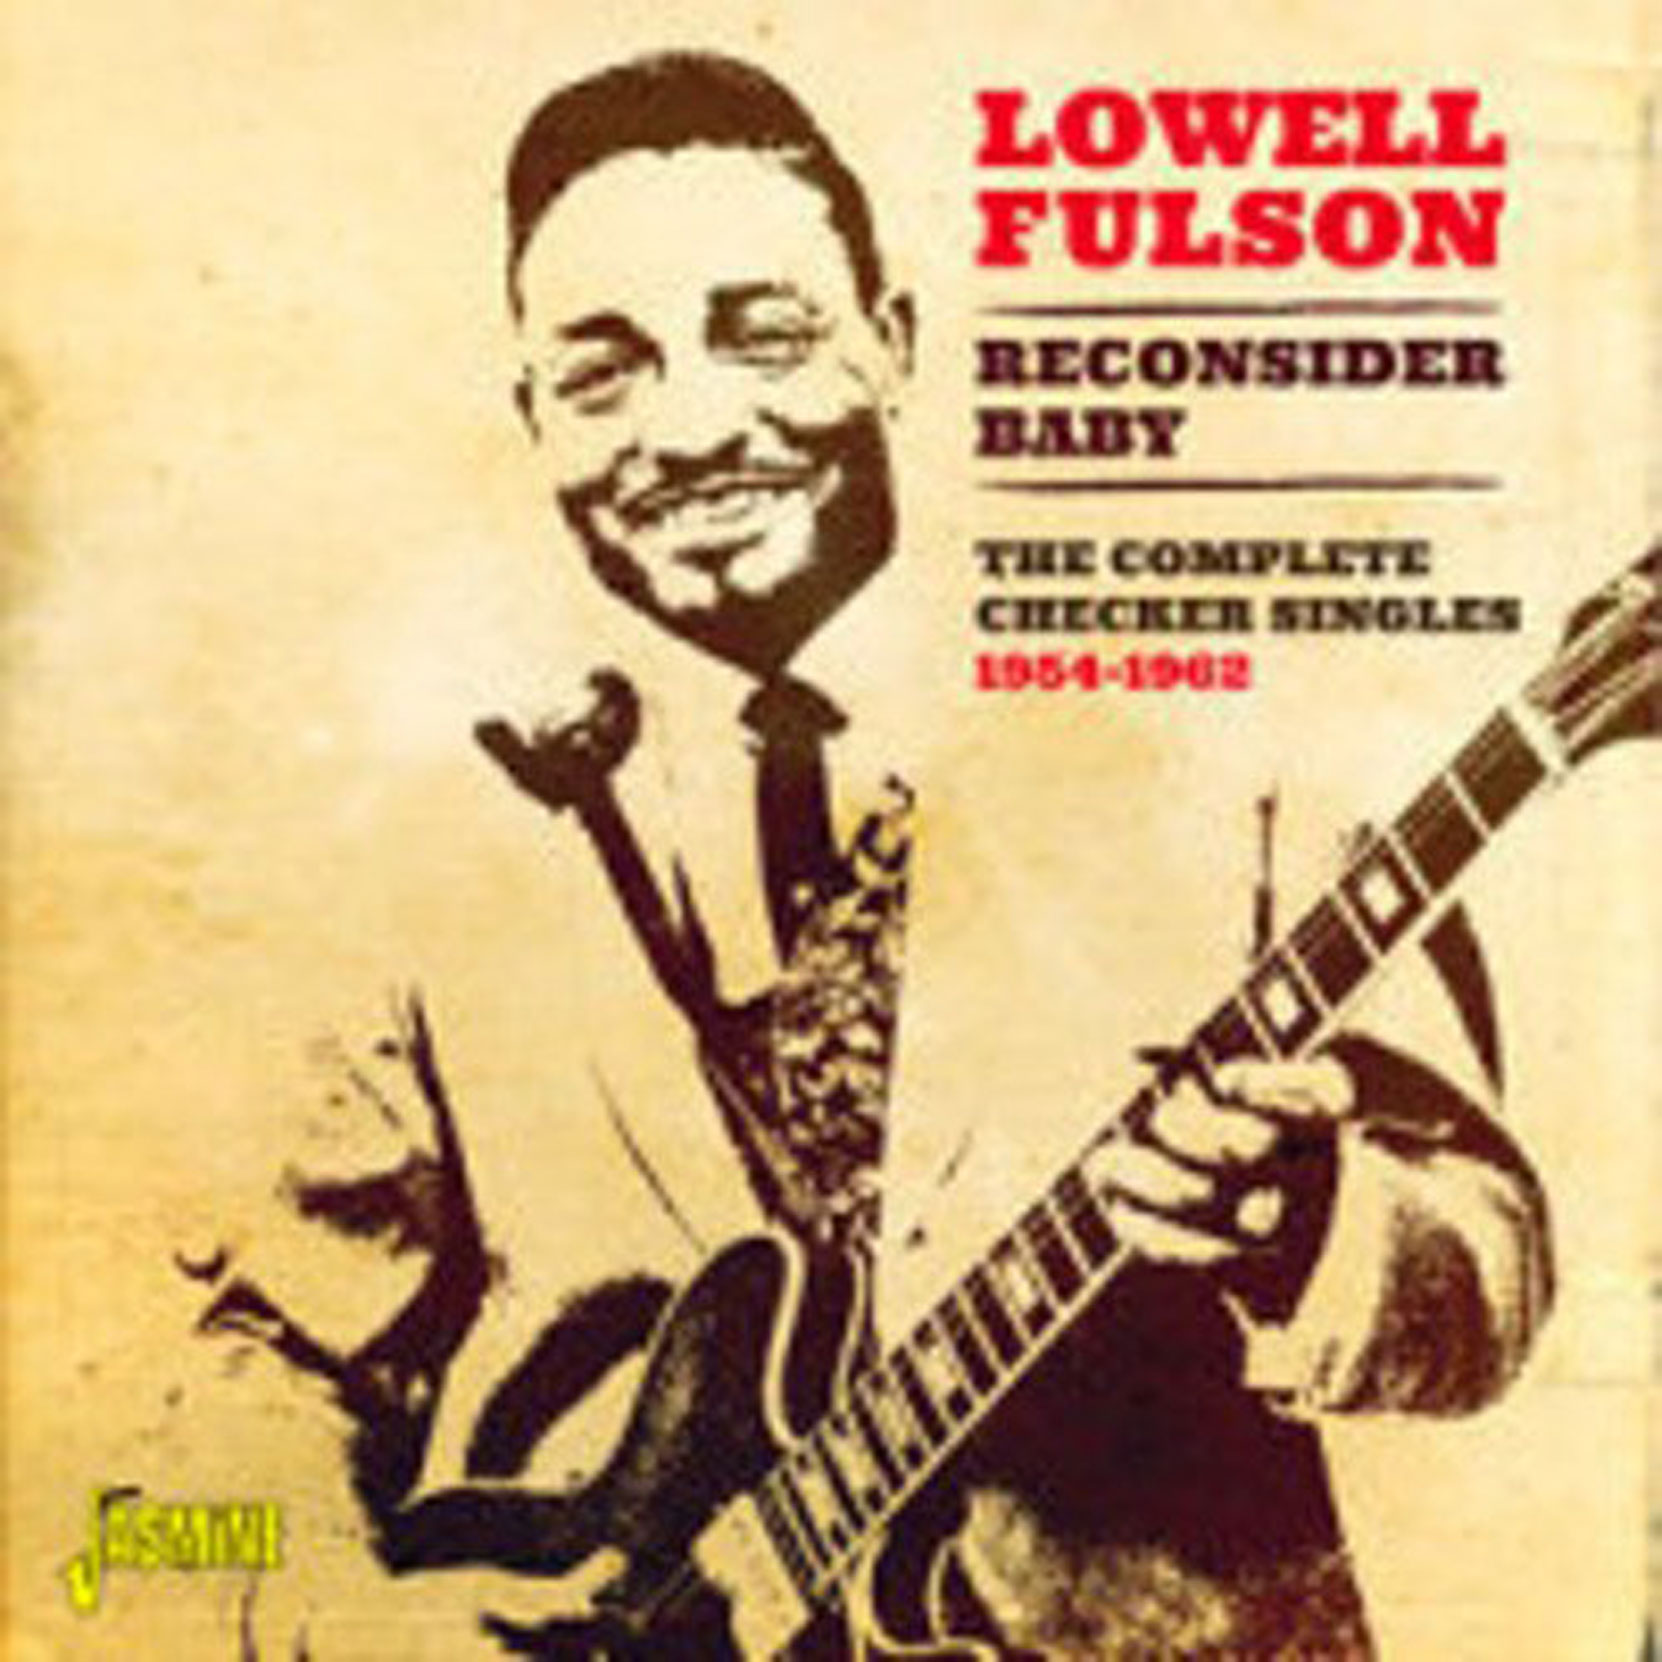 CD cover, Lowell Fulson, Reconsider Baby - The Complete Checker Singles 1954-1962, released on Jasmine Records